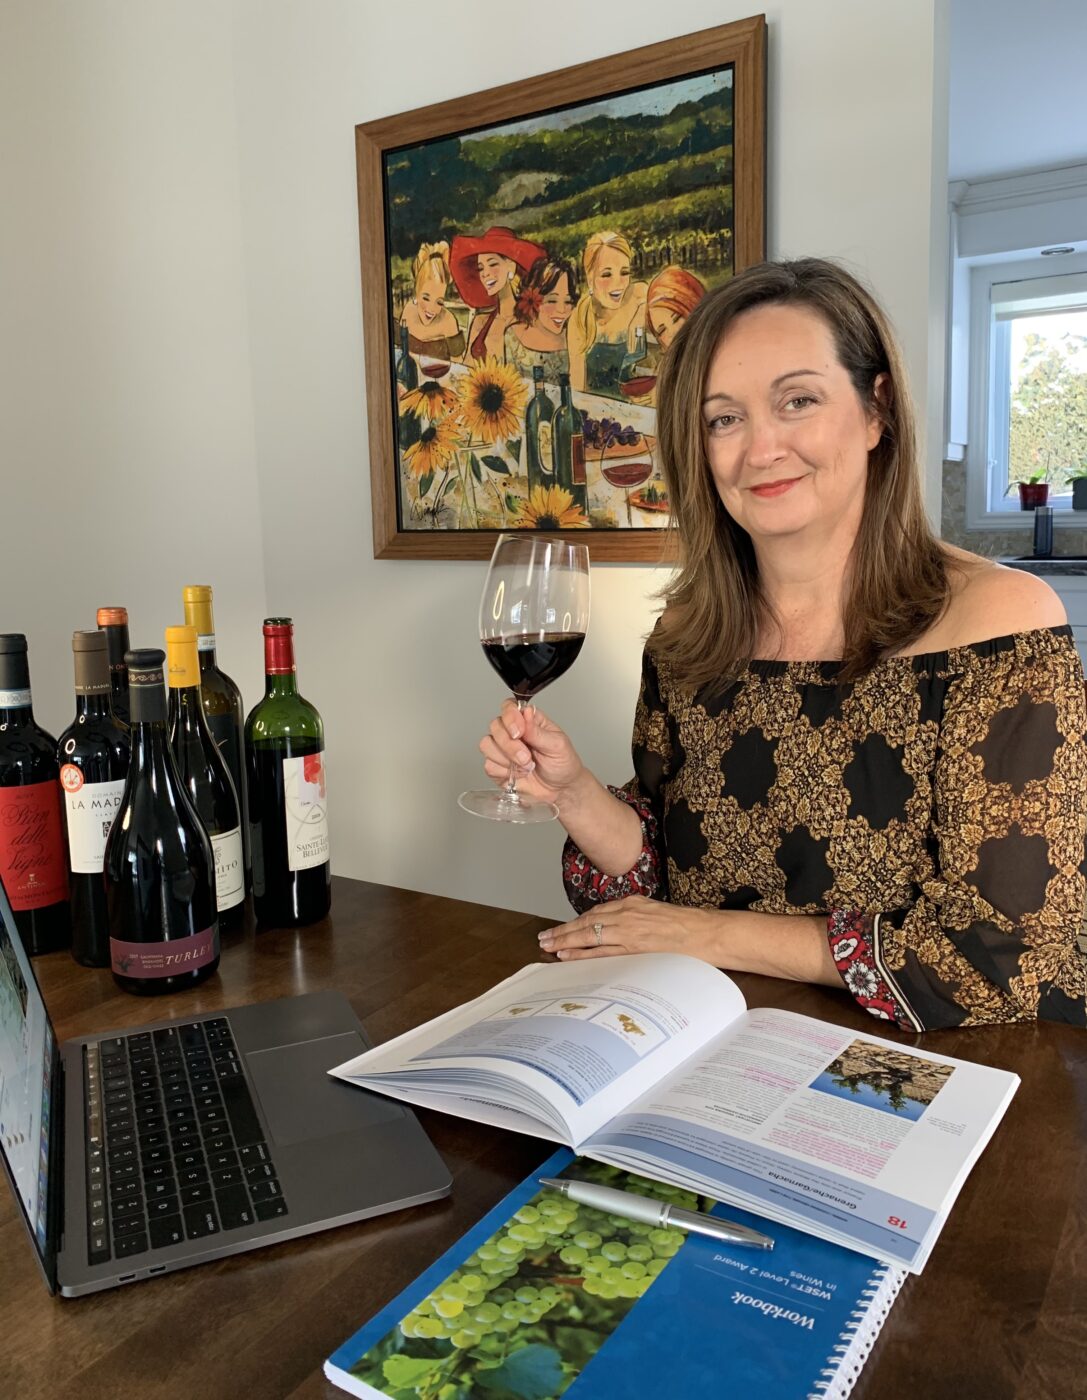 Woman sitting a table with bottles of wine and text books while holding a glass of red wine